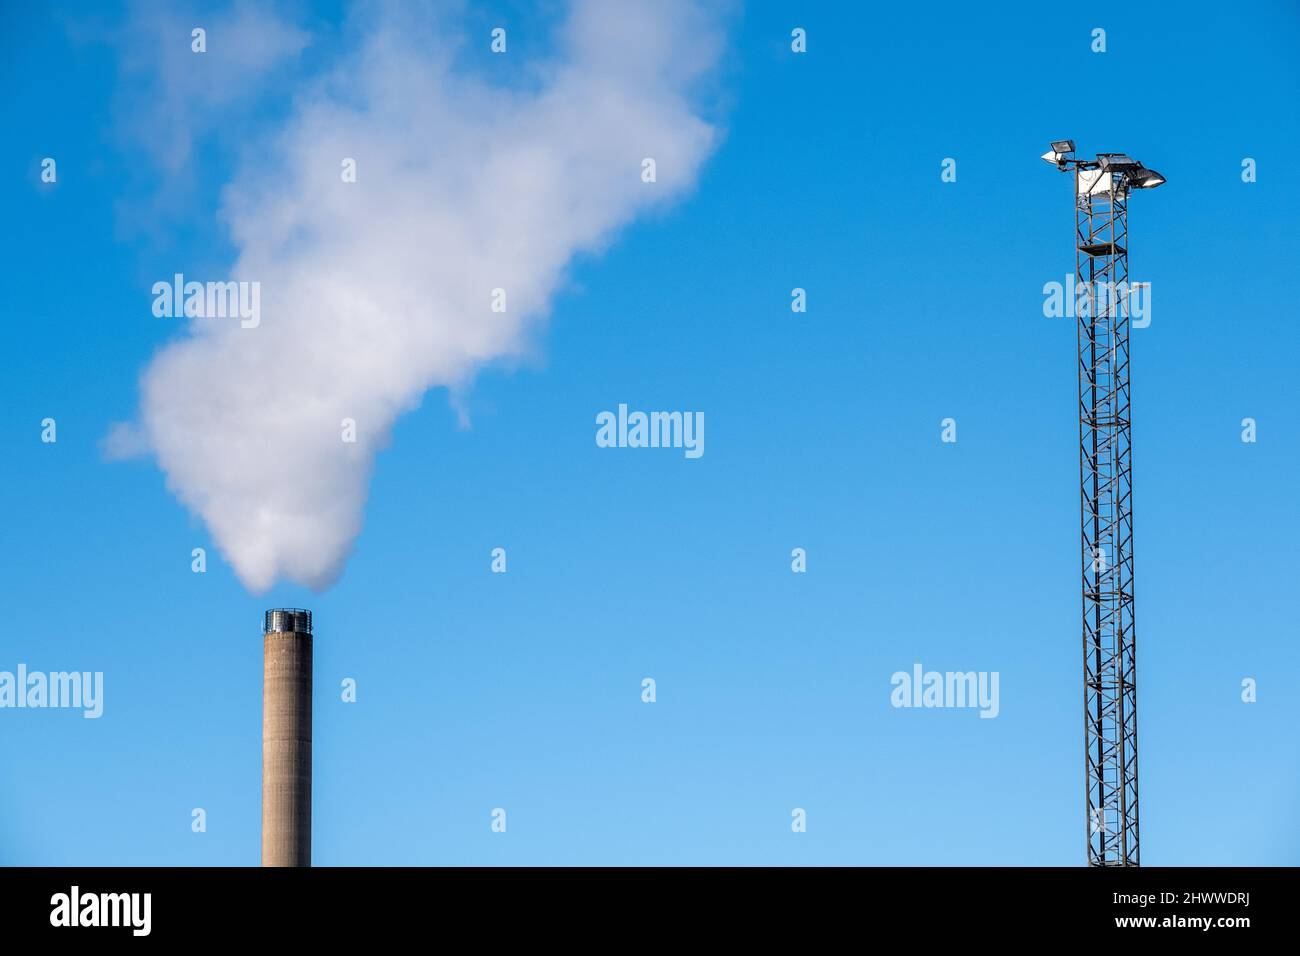 Helsinki / Finland - FEBRUARY 26, 2022: Tall light mast and a smokestack with exhaust gas against a bright blue sky Stock Photo